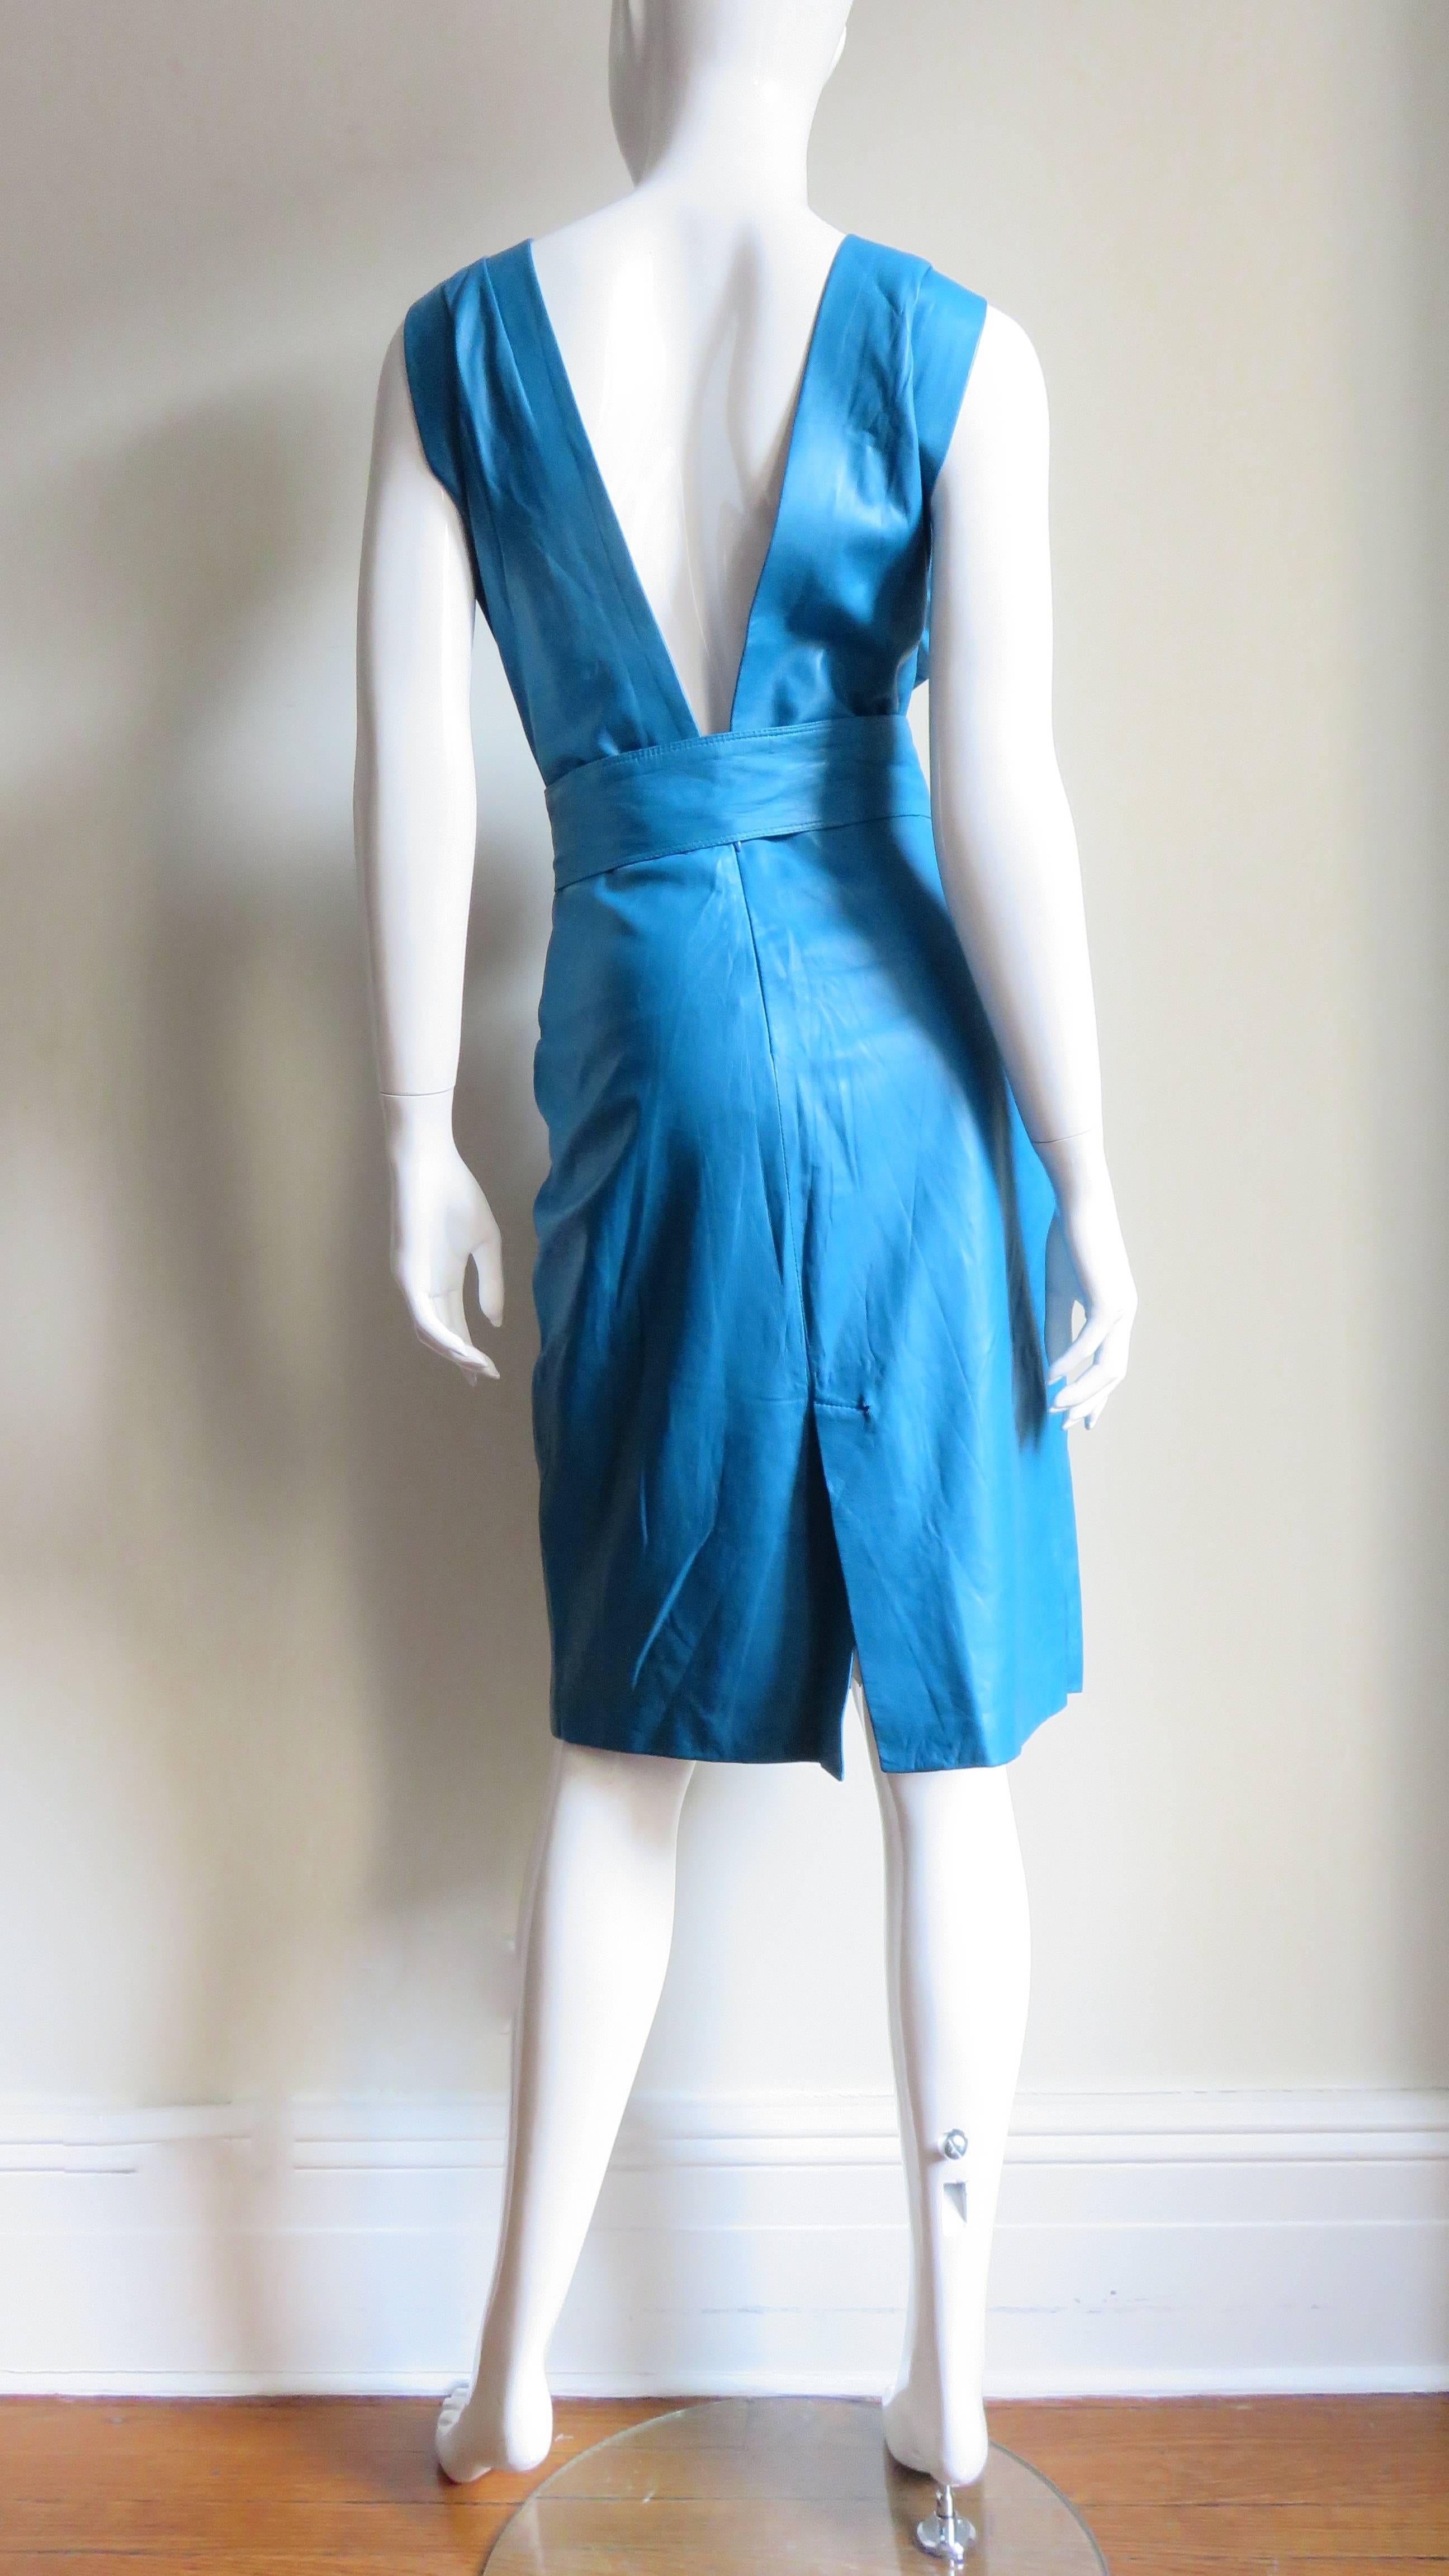  Gianni Versace New Turquoise Leather Dress 1990s For Sale 6